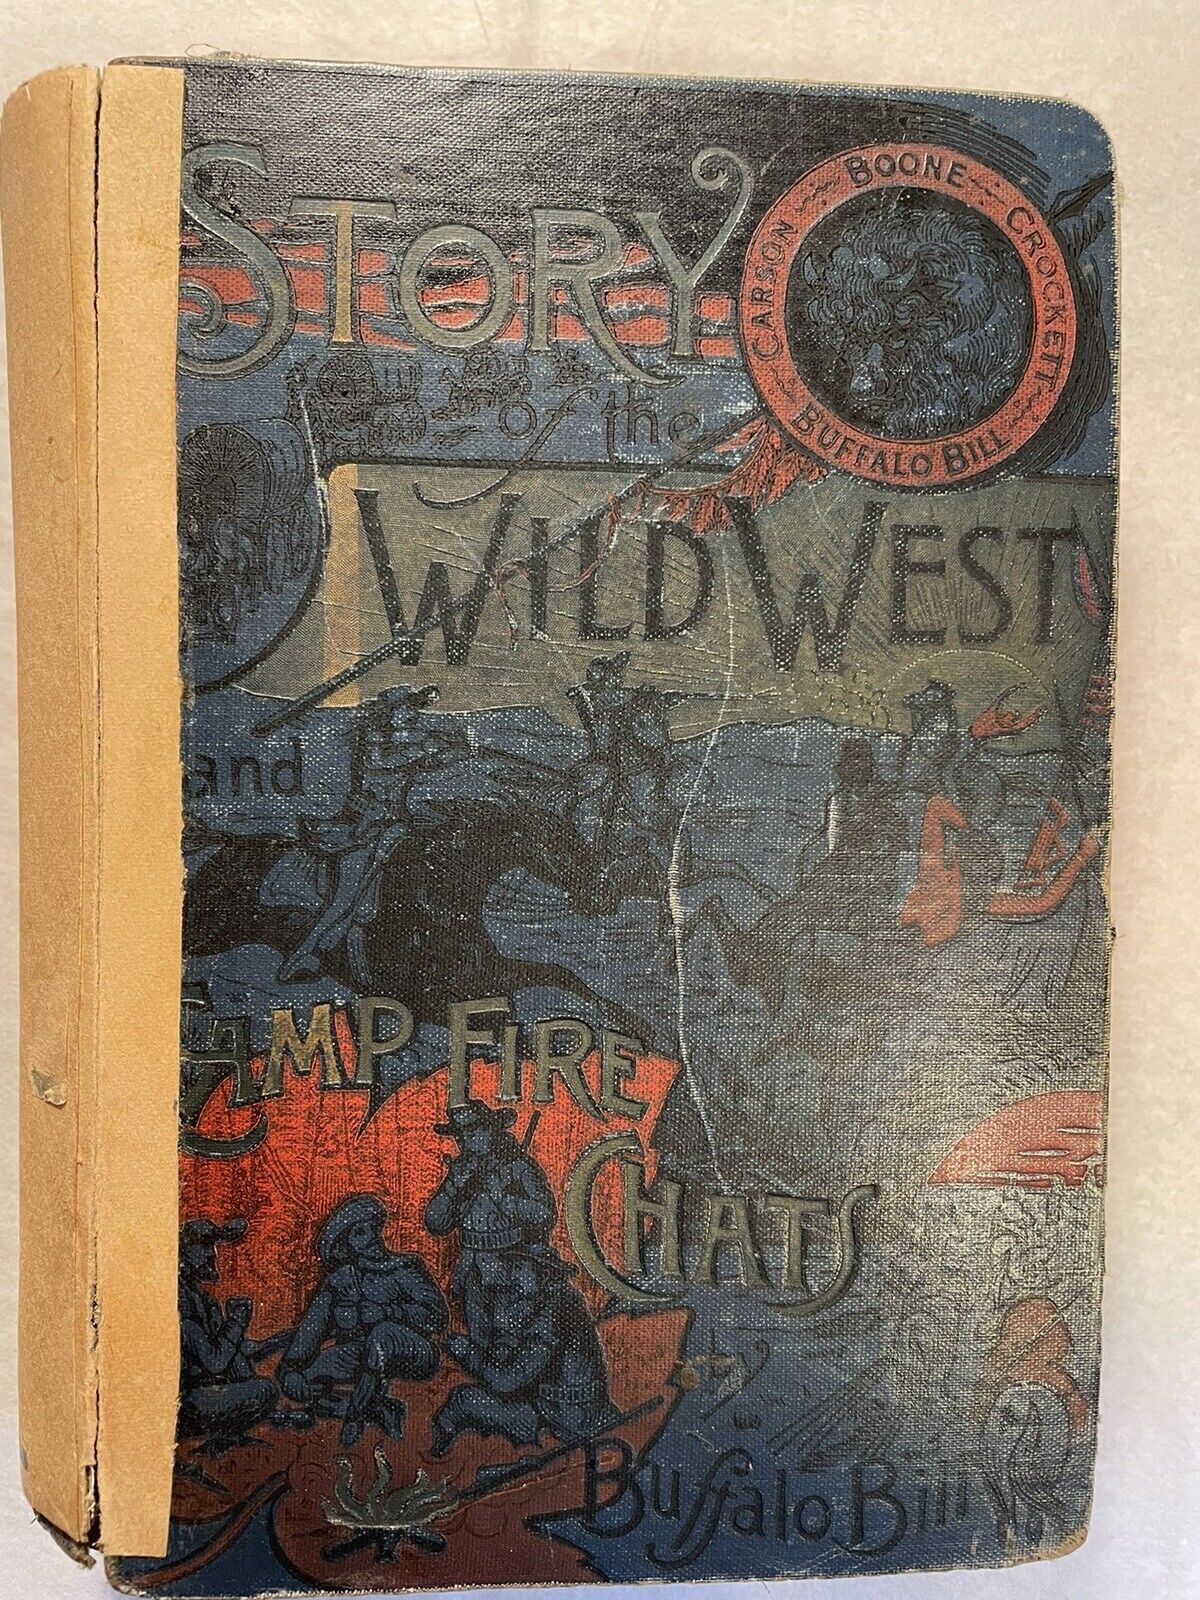 Buffalo Bill Cody Story Of The Wild West And Campfire Chats 1888 Boone Crocket